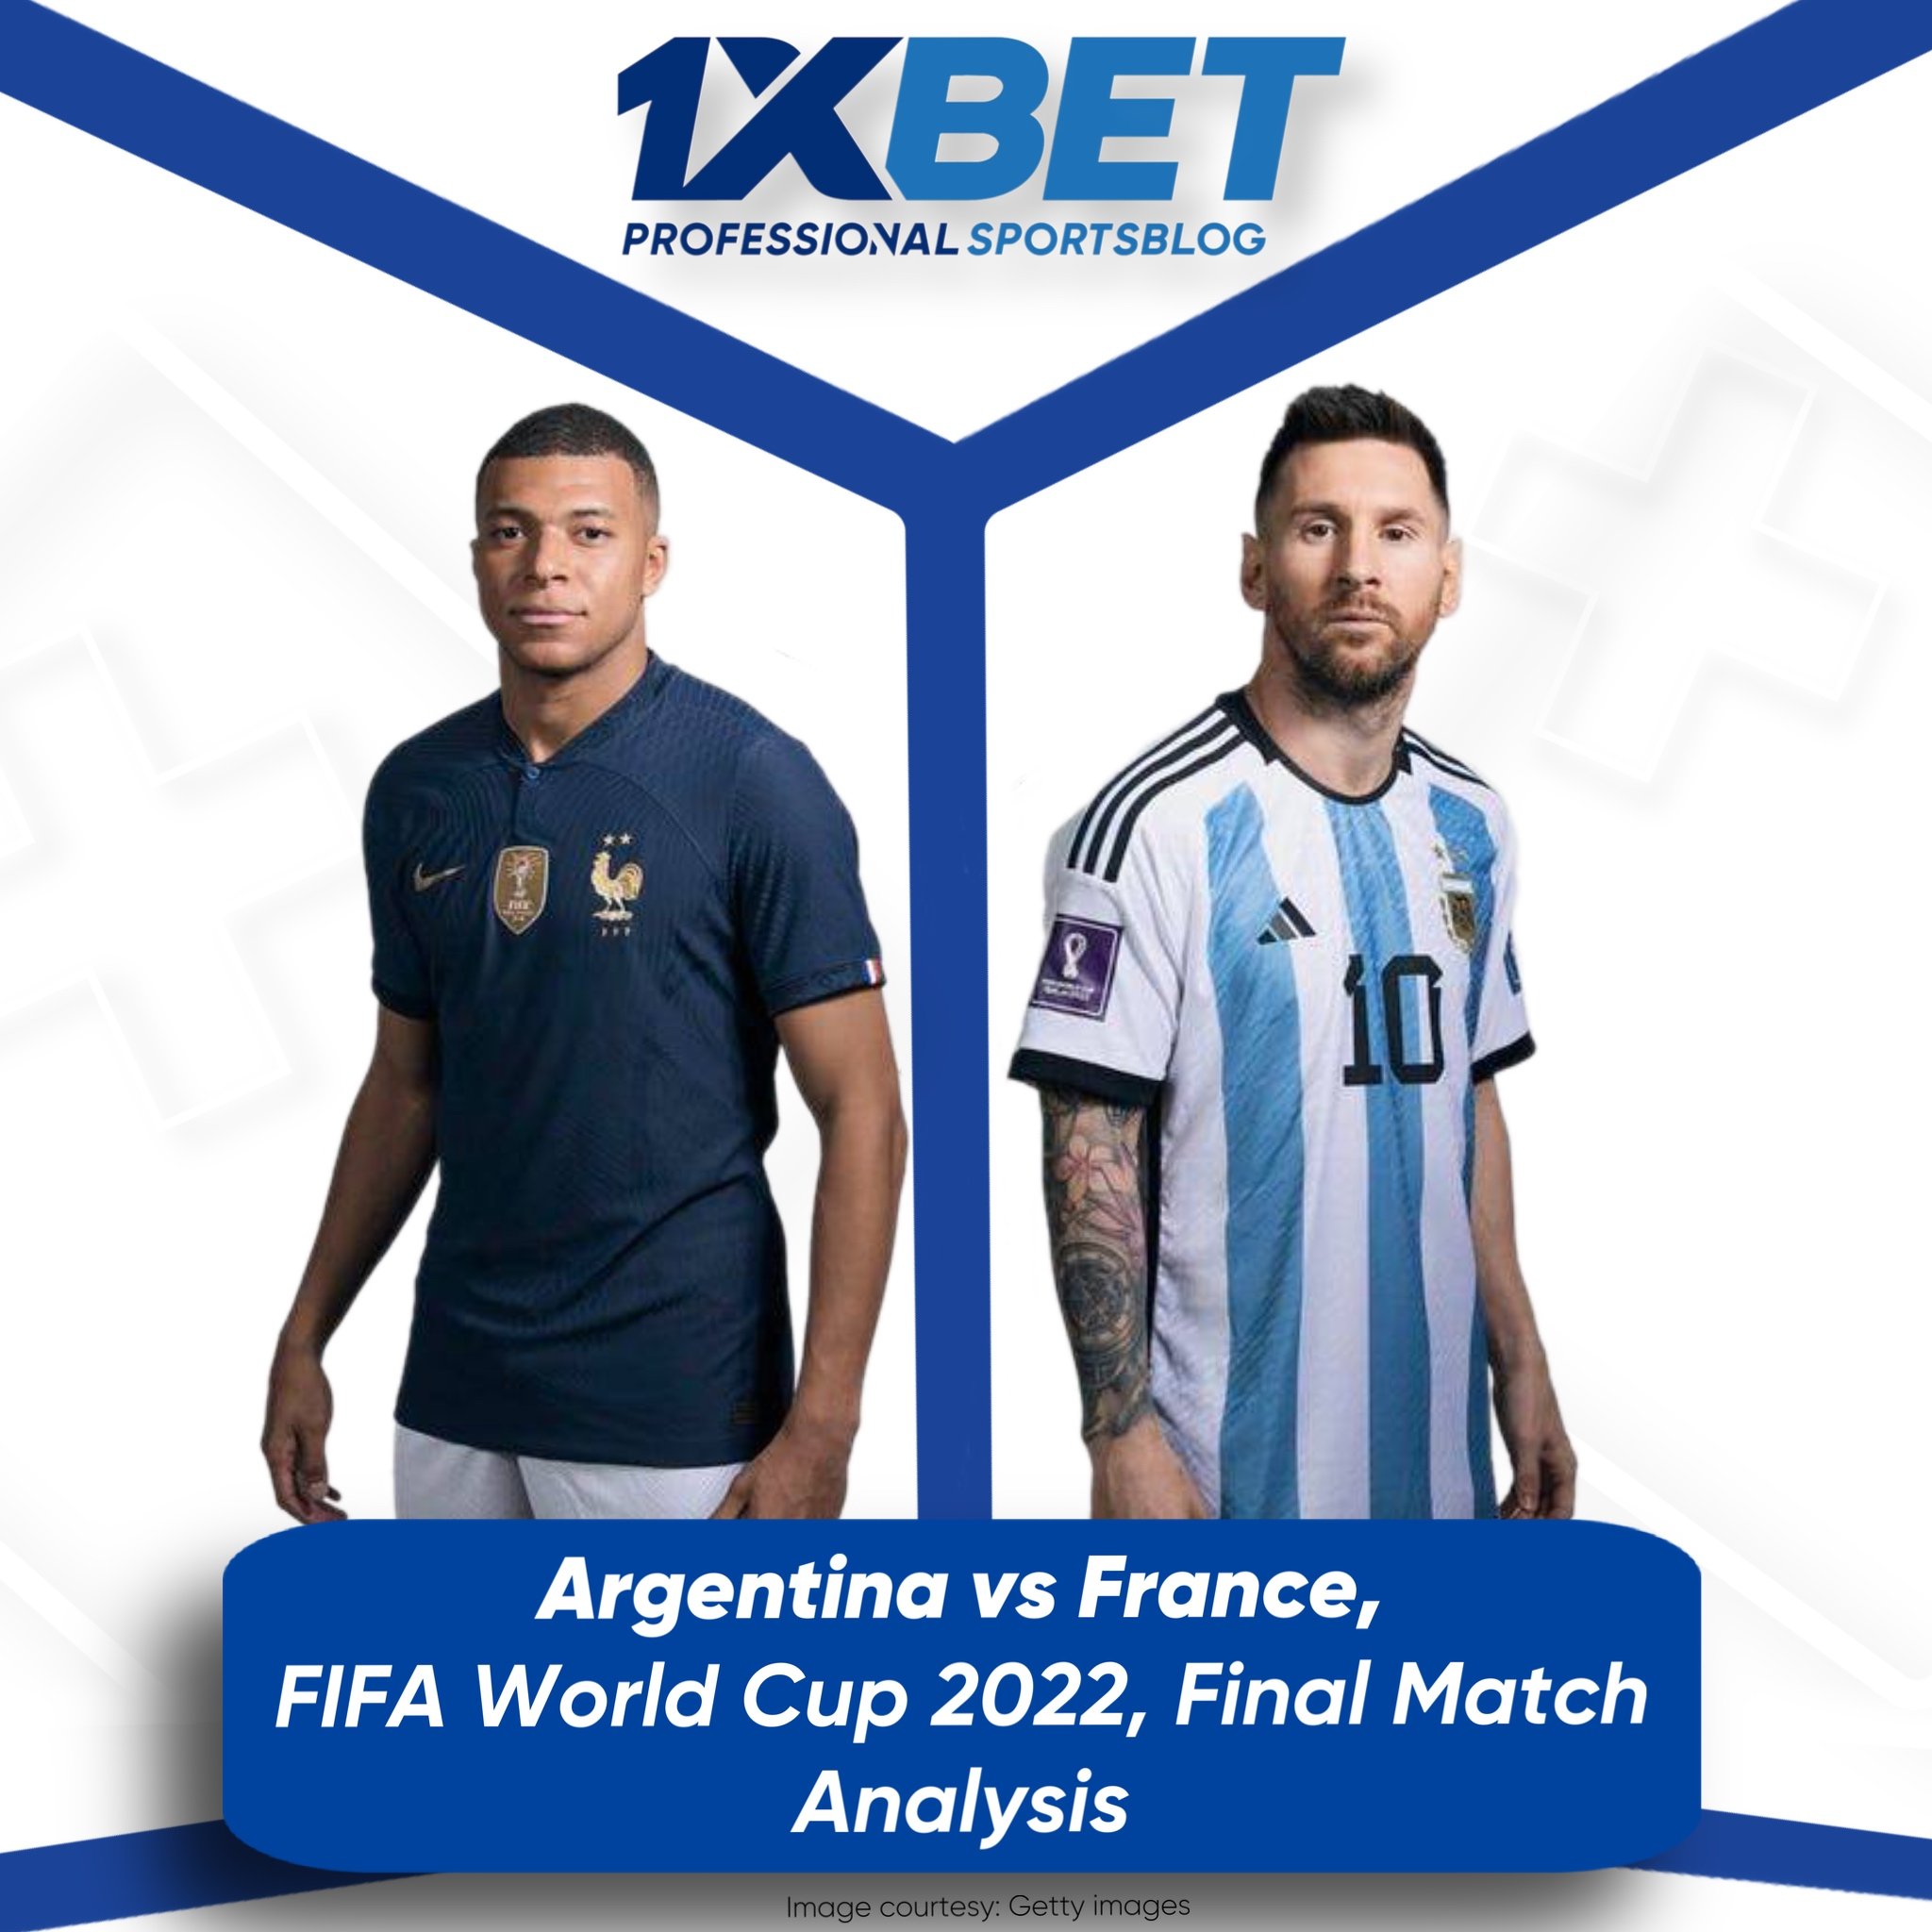 Argentina vs France, FIFA World Cup 2022, Final Match Analysis